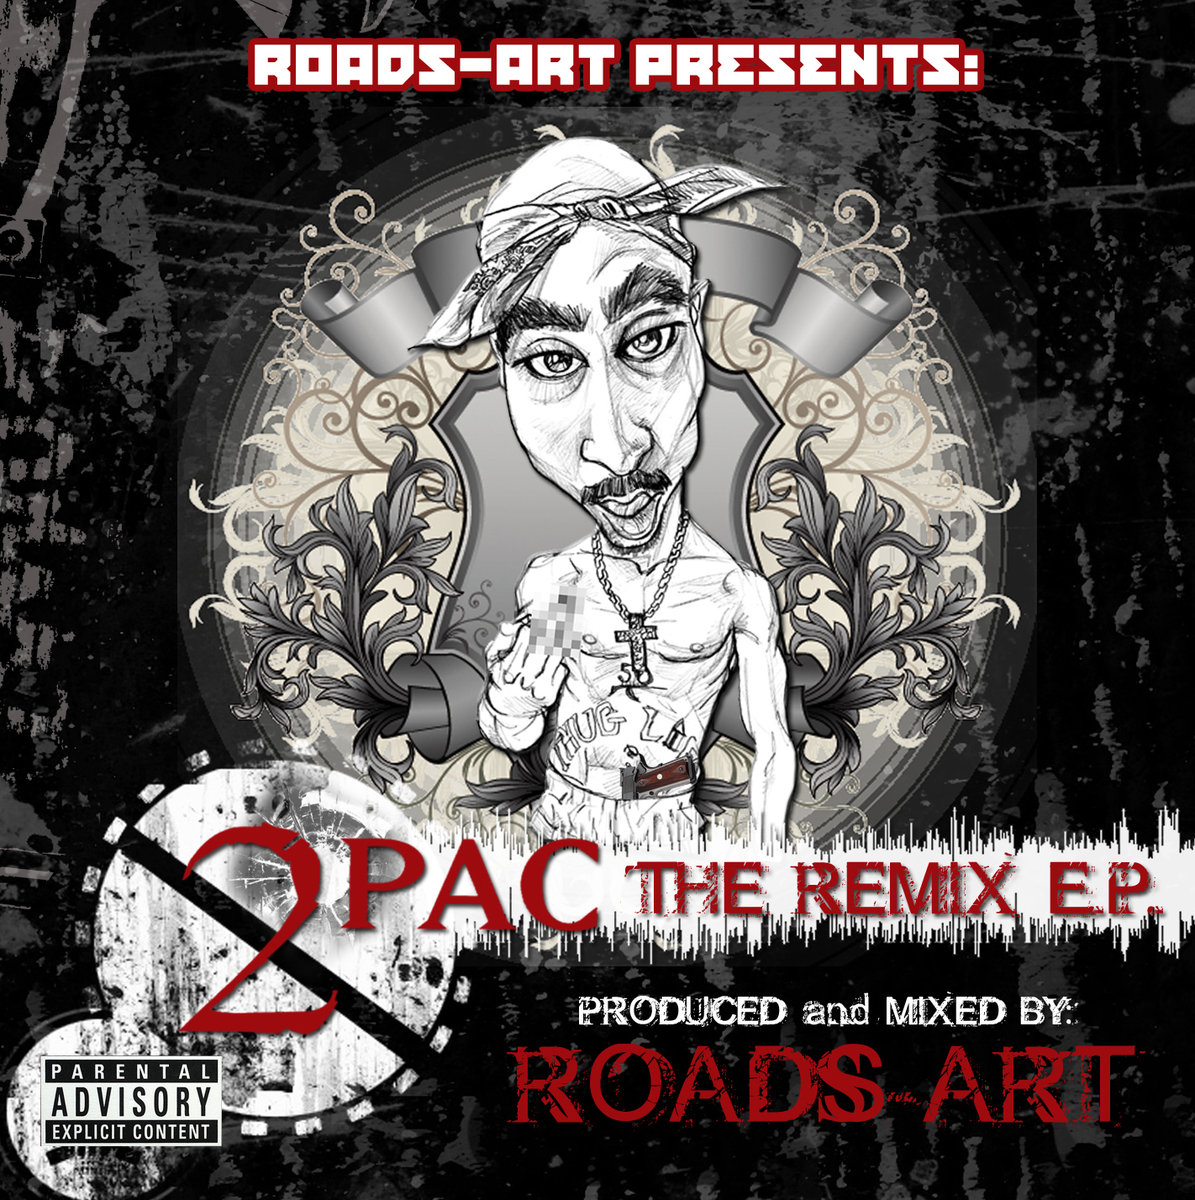 2Pac and Roads-Art - "The Remix EP"